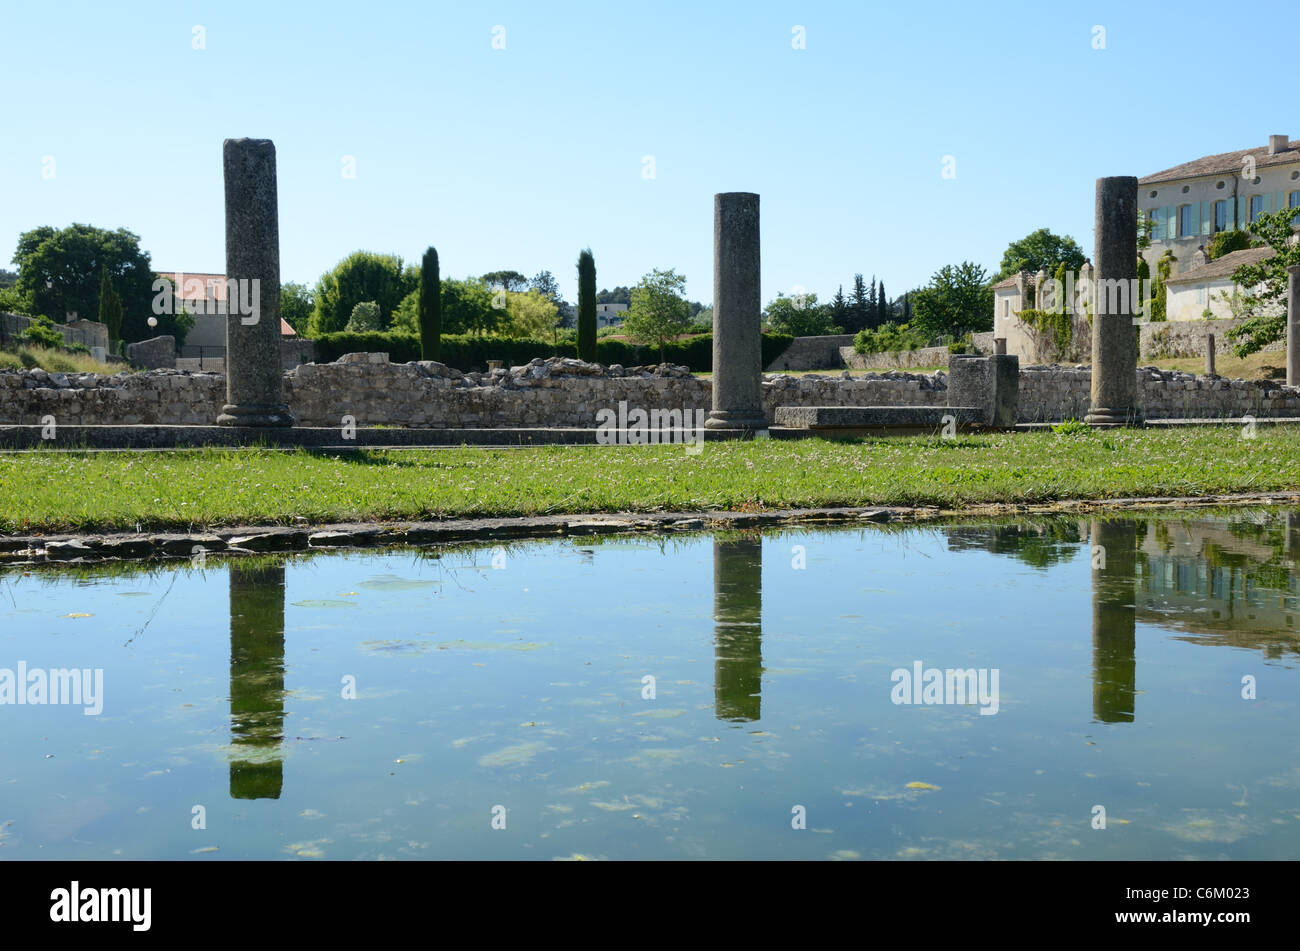 Roman Ruins and Columns Reflected in Courtyard Pool at the Roman Town of Vaison-la-Romaine, Vaucluse, Provence, France Stock Photo